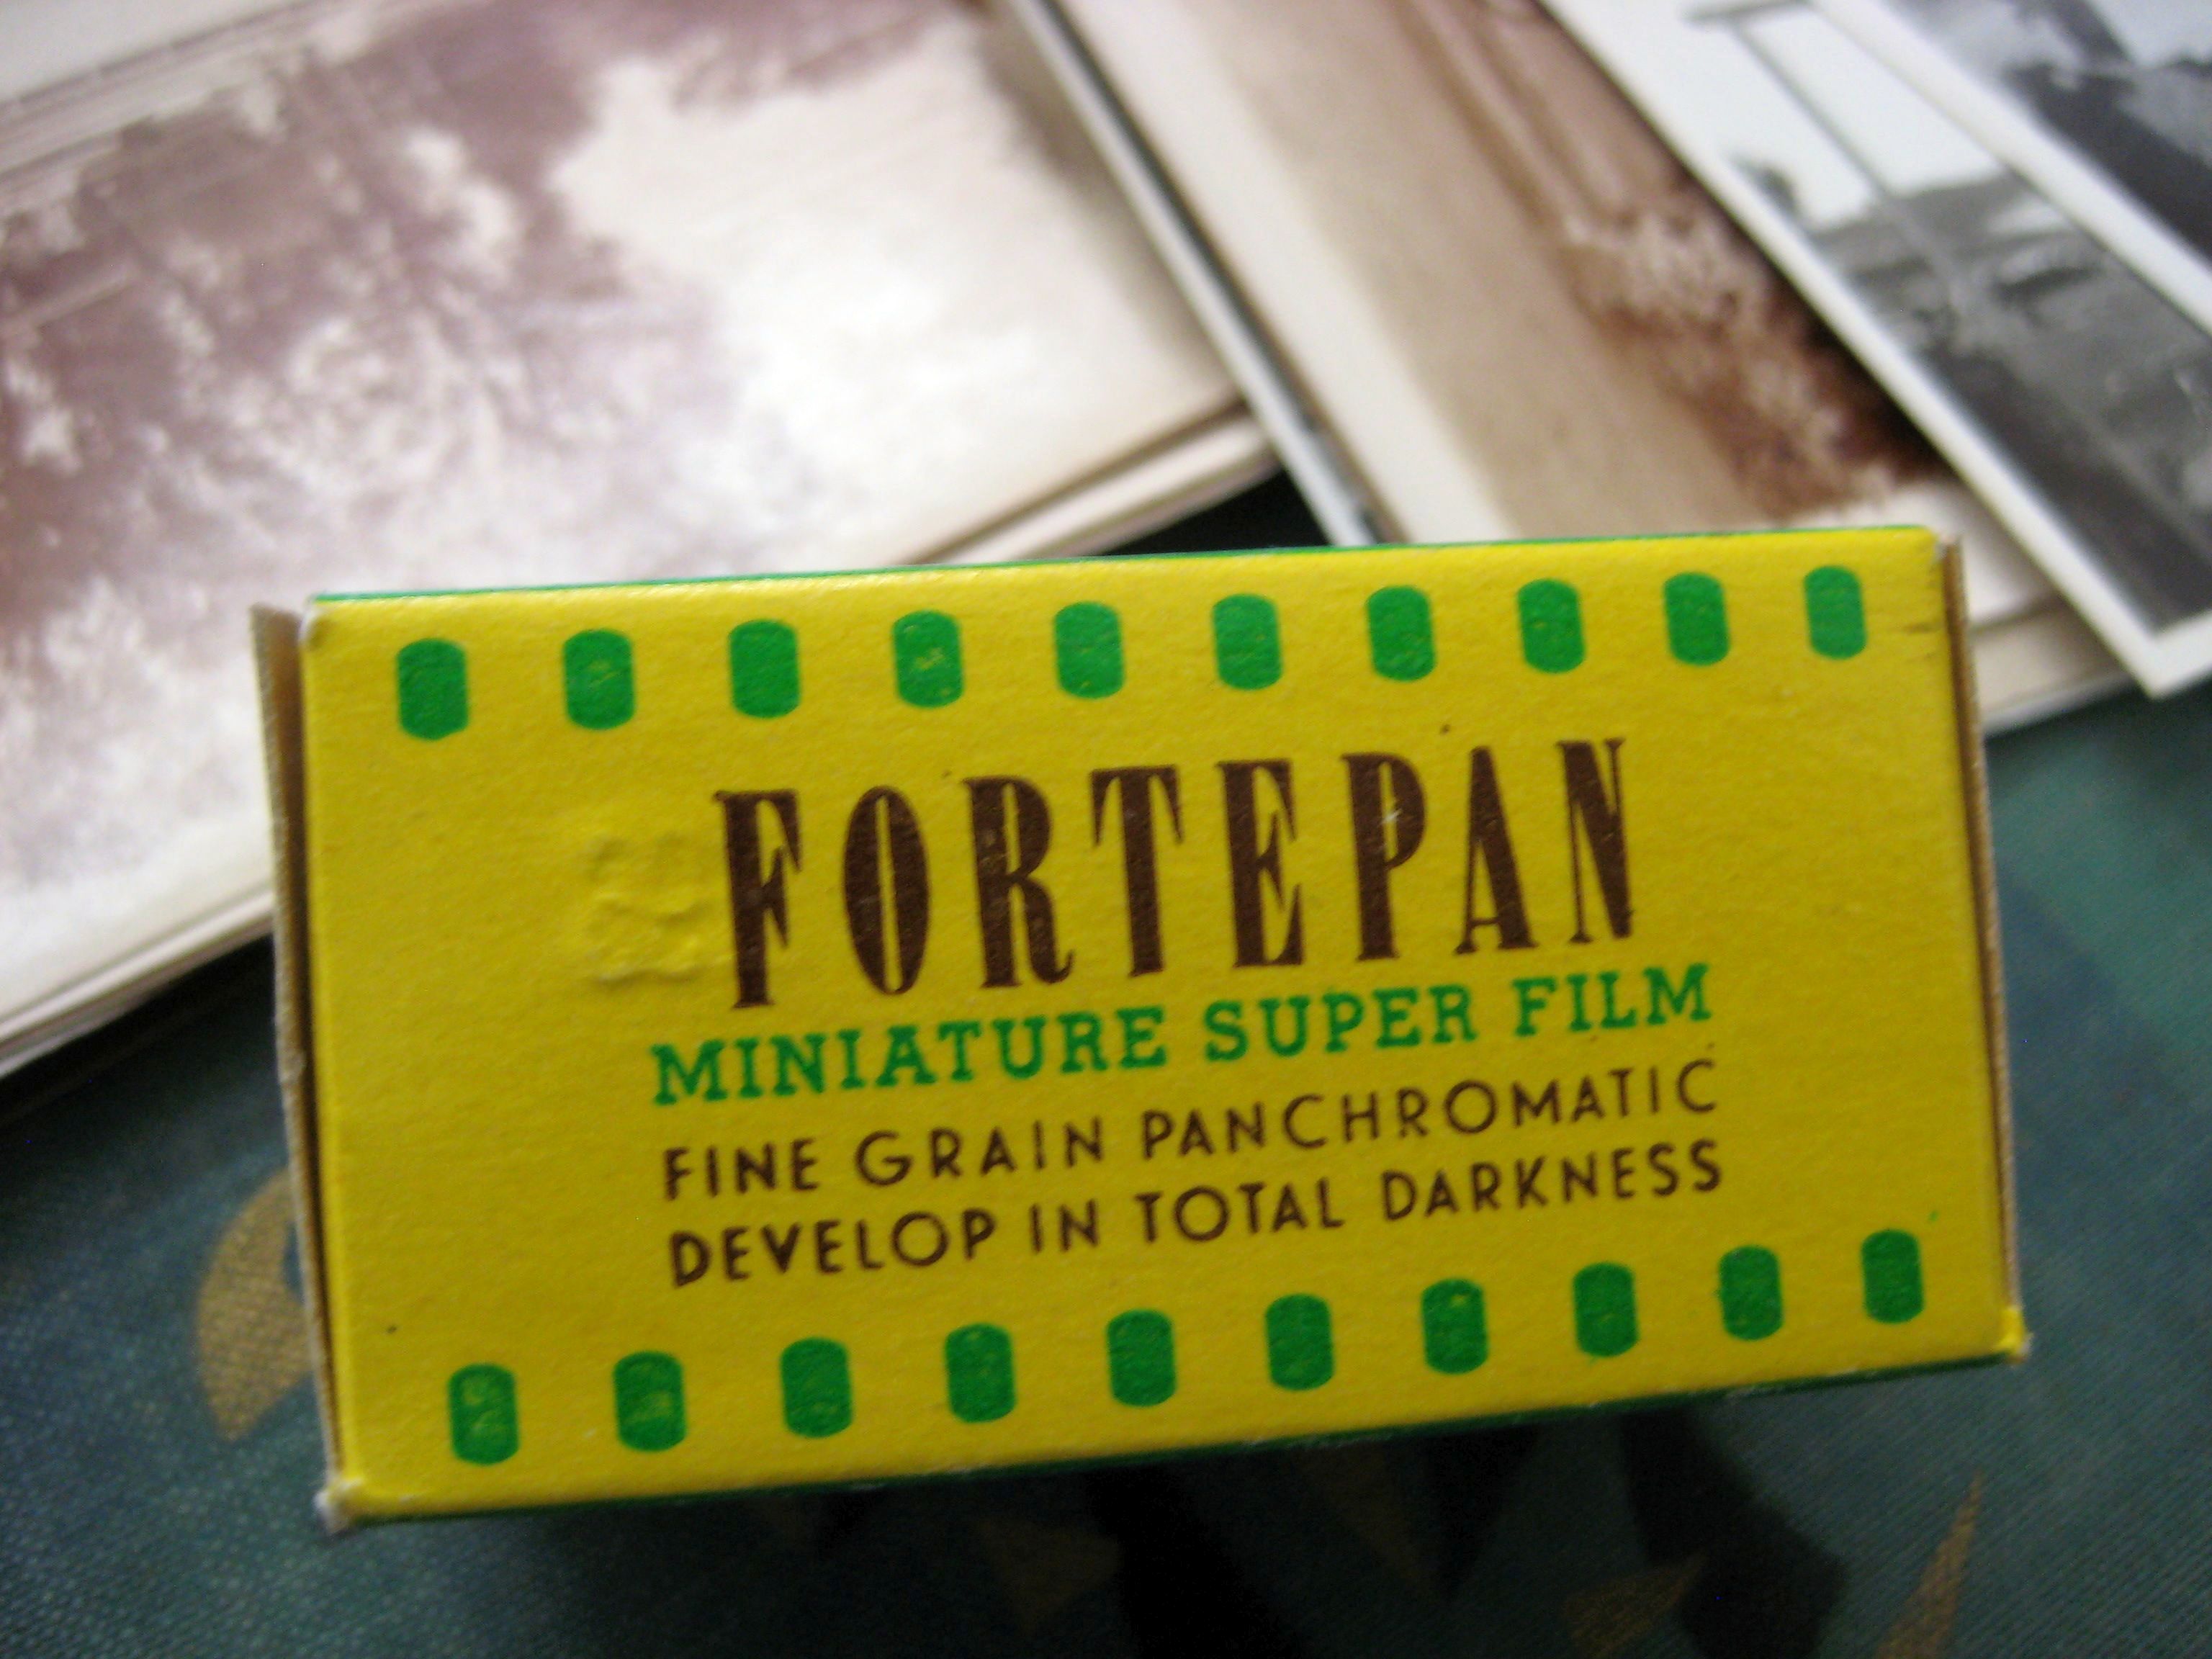 Fortepan film by Forte that the collection was named after. Photo: Tamás Scheibner